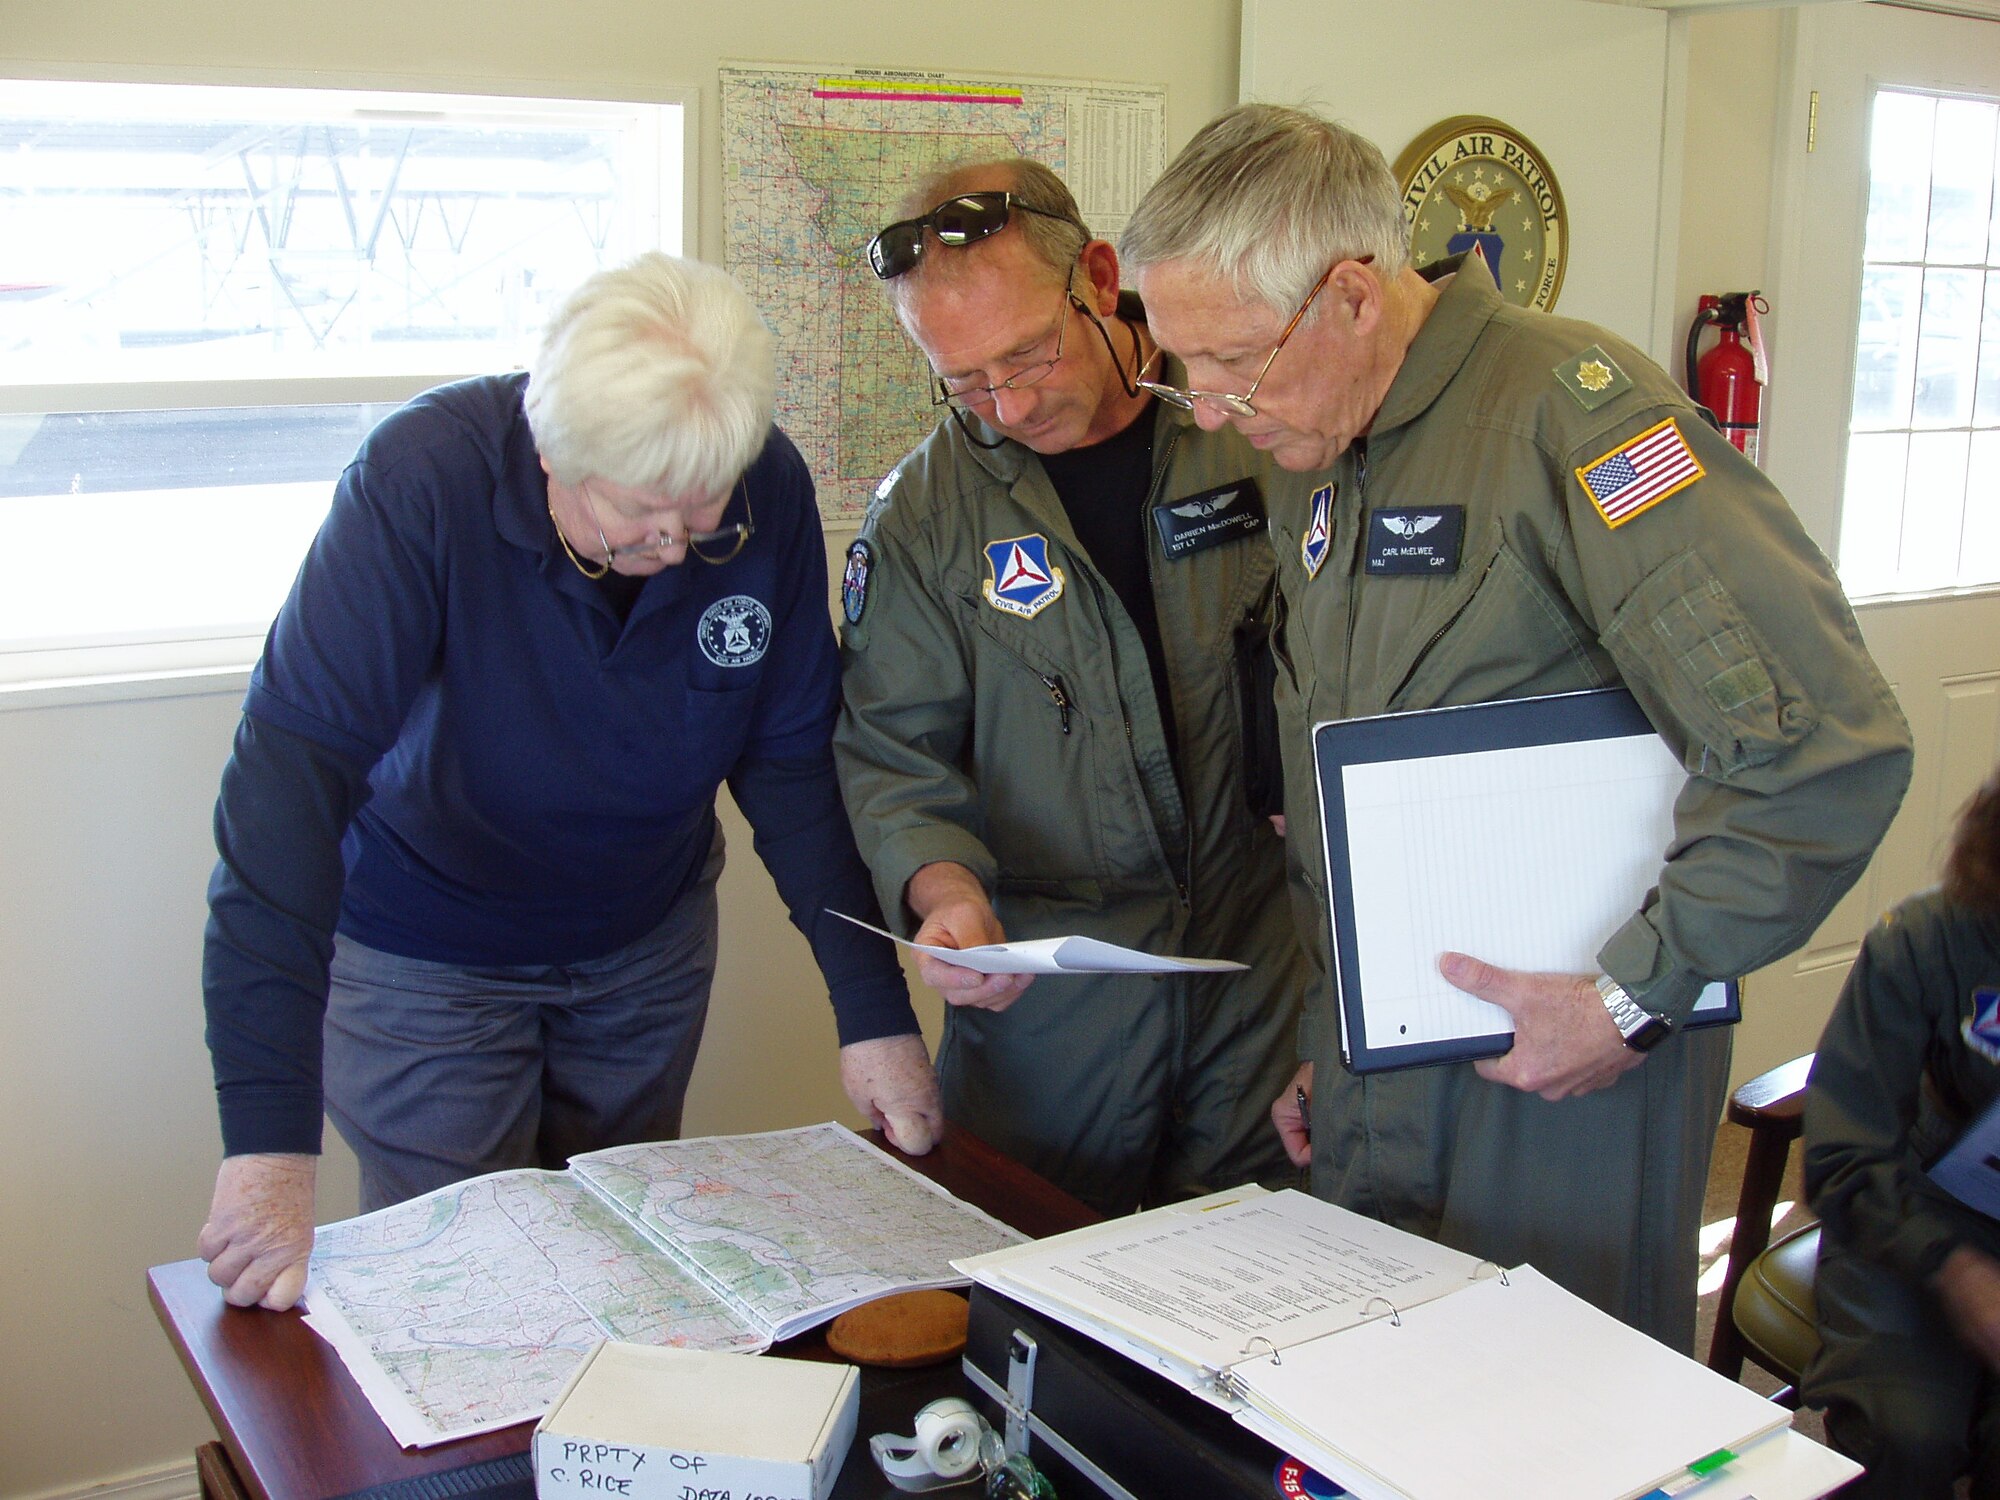 (From left) Maj. Esther Grupenhagen, Gateway Senior Squadron, briefs Kansas Wing aircrew 1st Lt. Darren MacDowell and Maj. Carl McElwee, both of the New Century Composite Squadron, about their first flight of the day.(Civil Air Patrol photo by Lt. Col. David A. Miller)